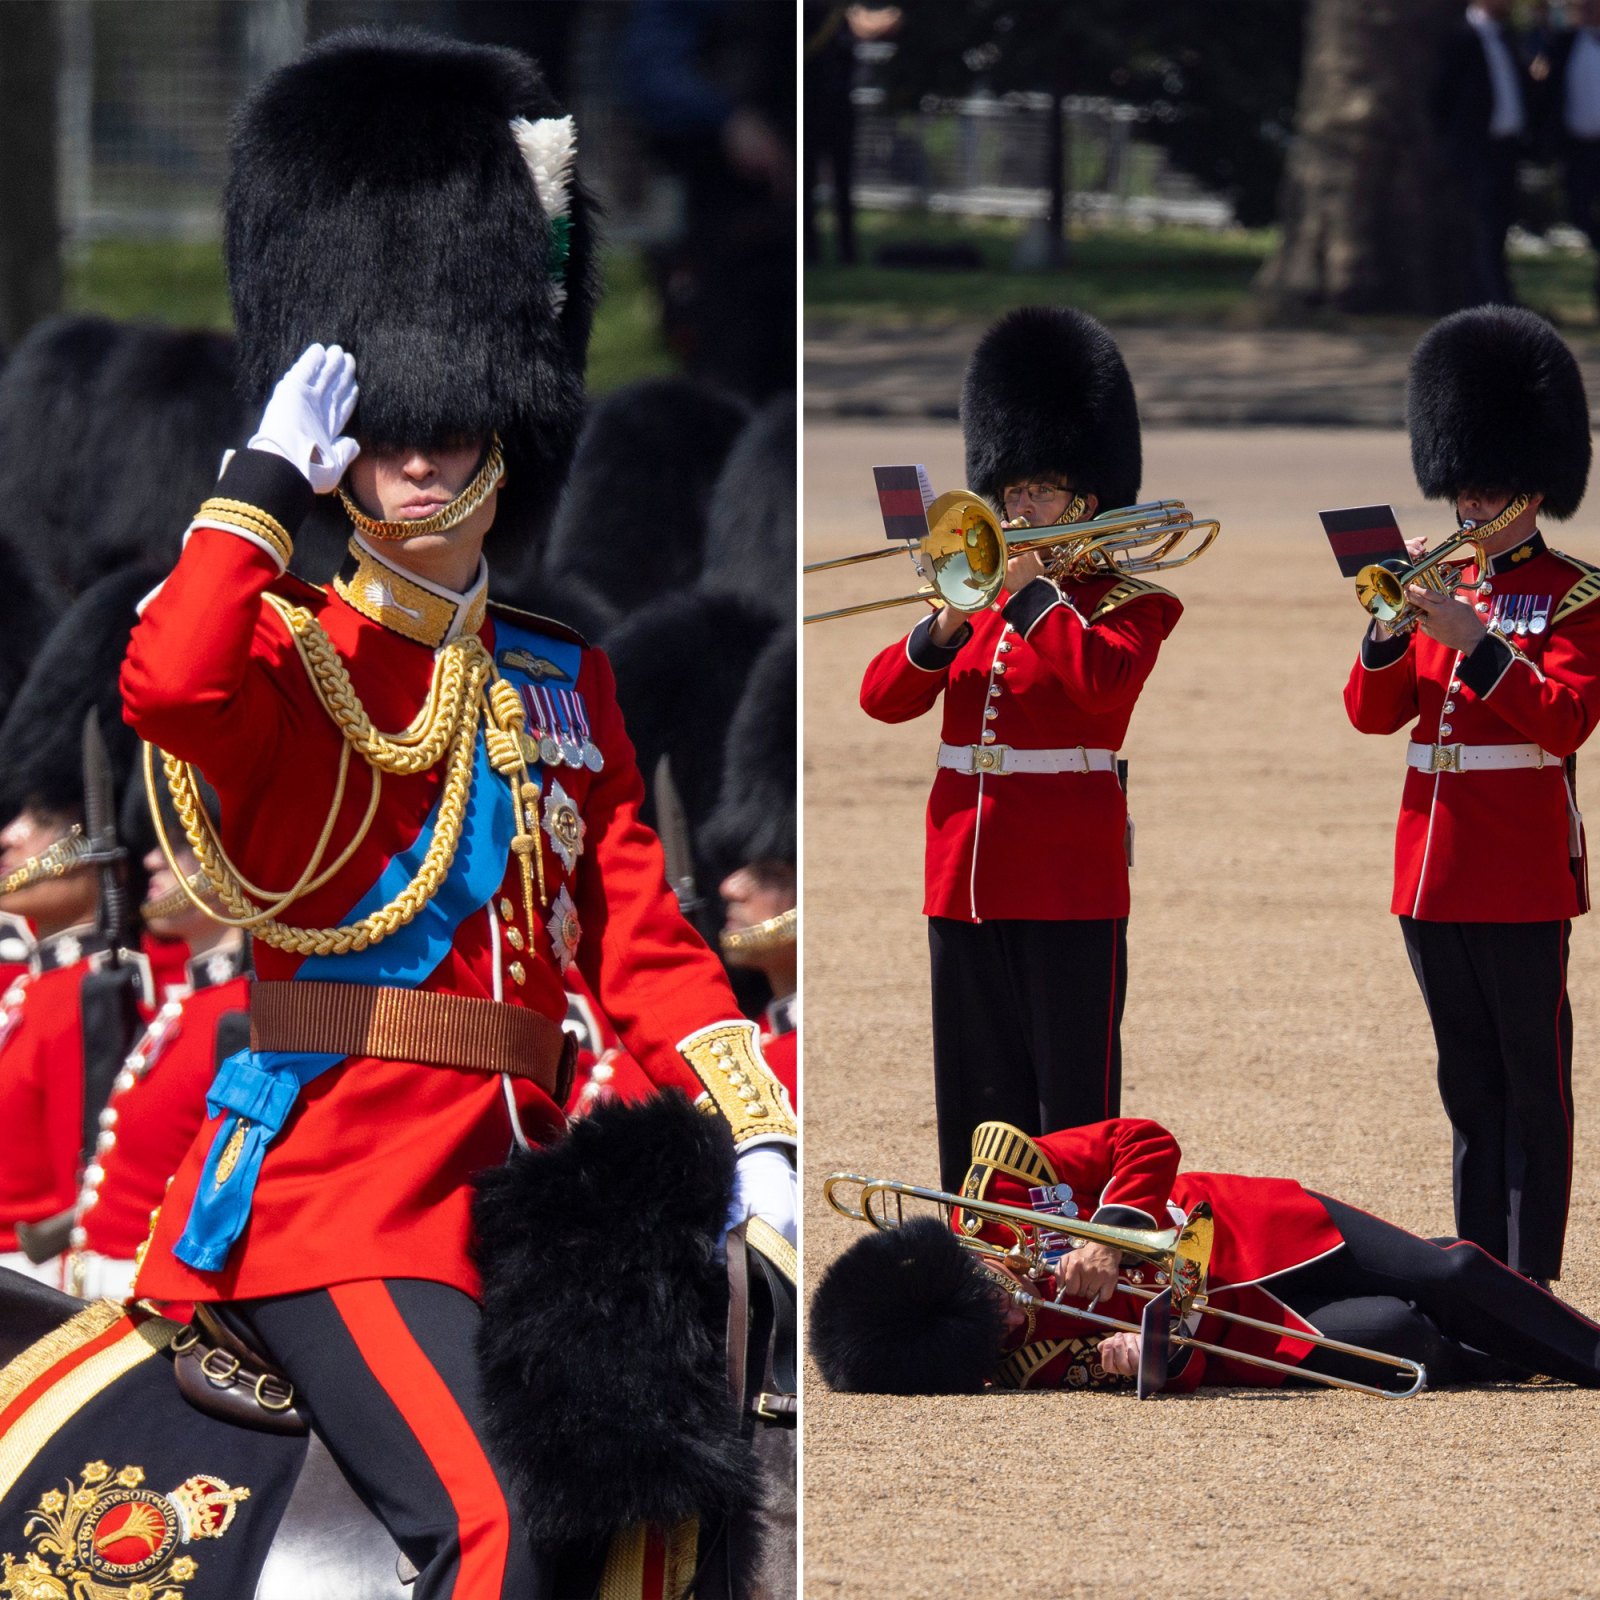 Prince William Praises Soldiers During Trooping the Colour Rehearsal After 2 Guards Faint